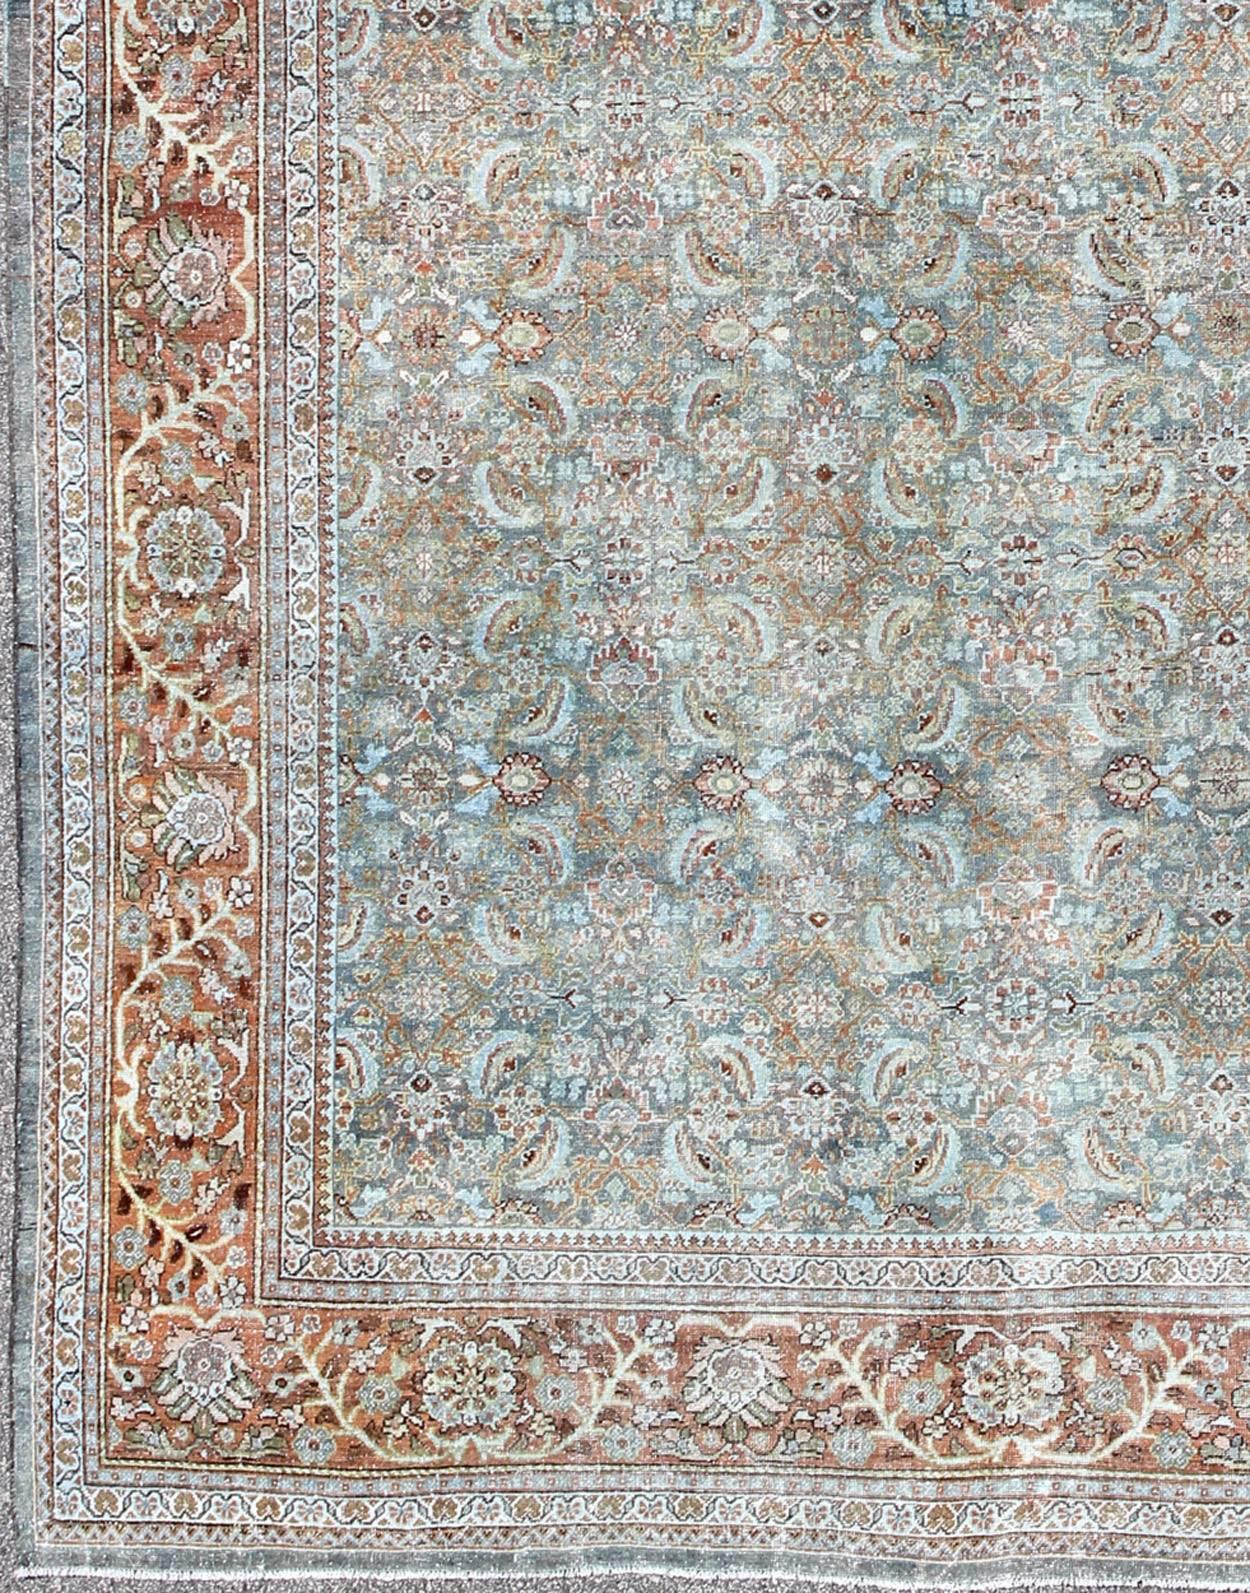 Antique Persian Sultanabad rug with all-over design in light blue and burnt orange, rug 17-0104, country of origin / type: Iran / Sultanabad, circa 1900

This beautiful and large antique Persian Sultanabad rug displays a gorgeous, all-over